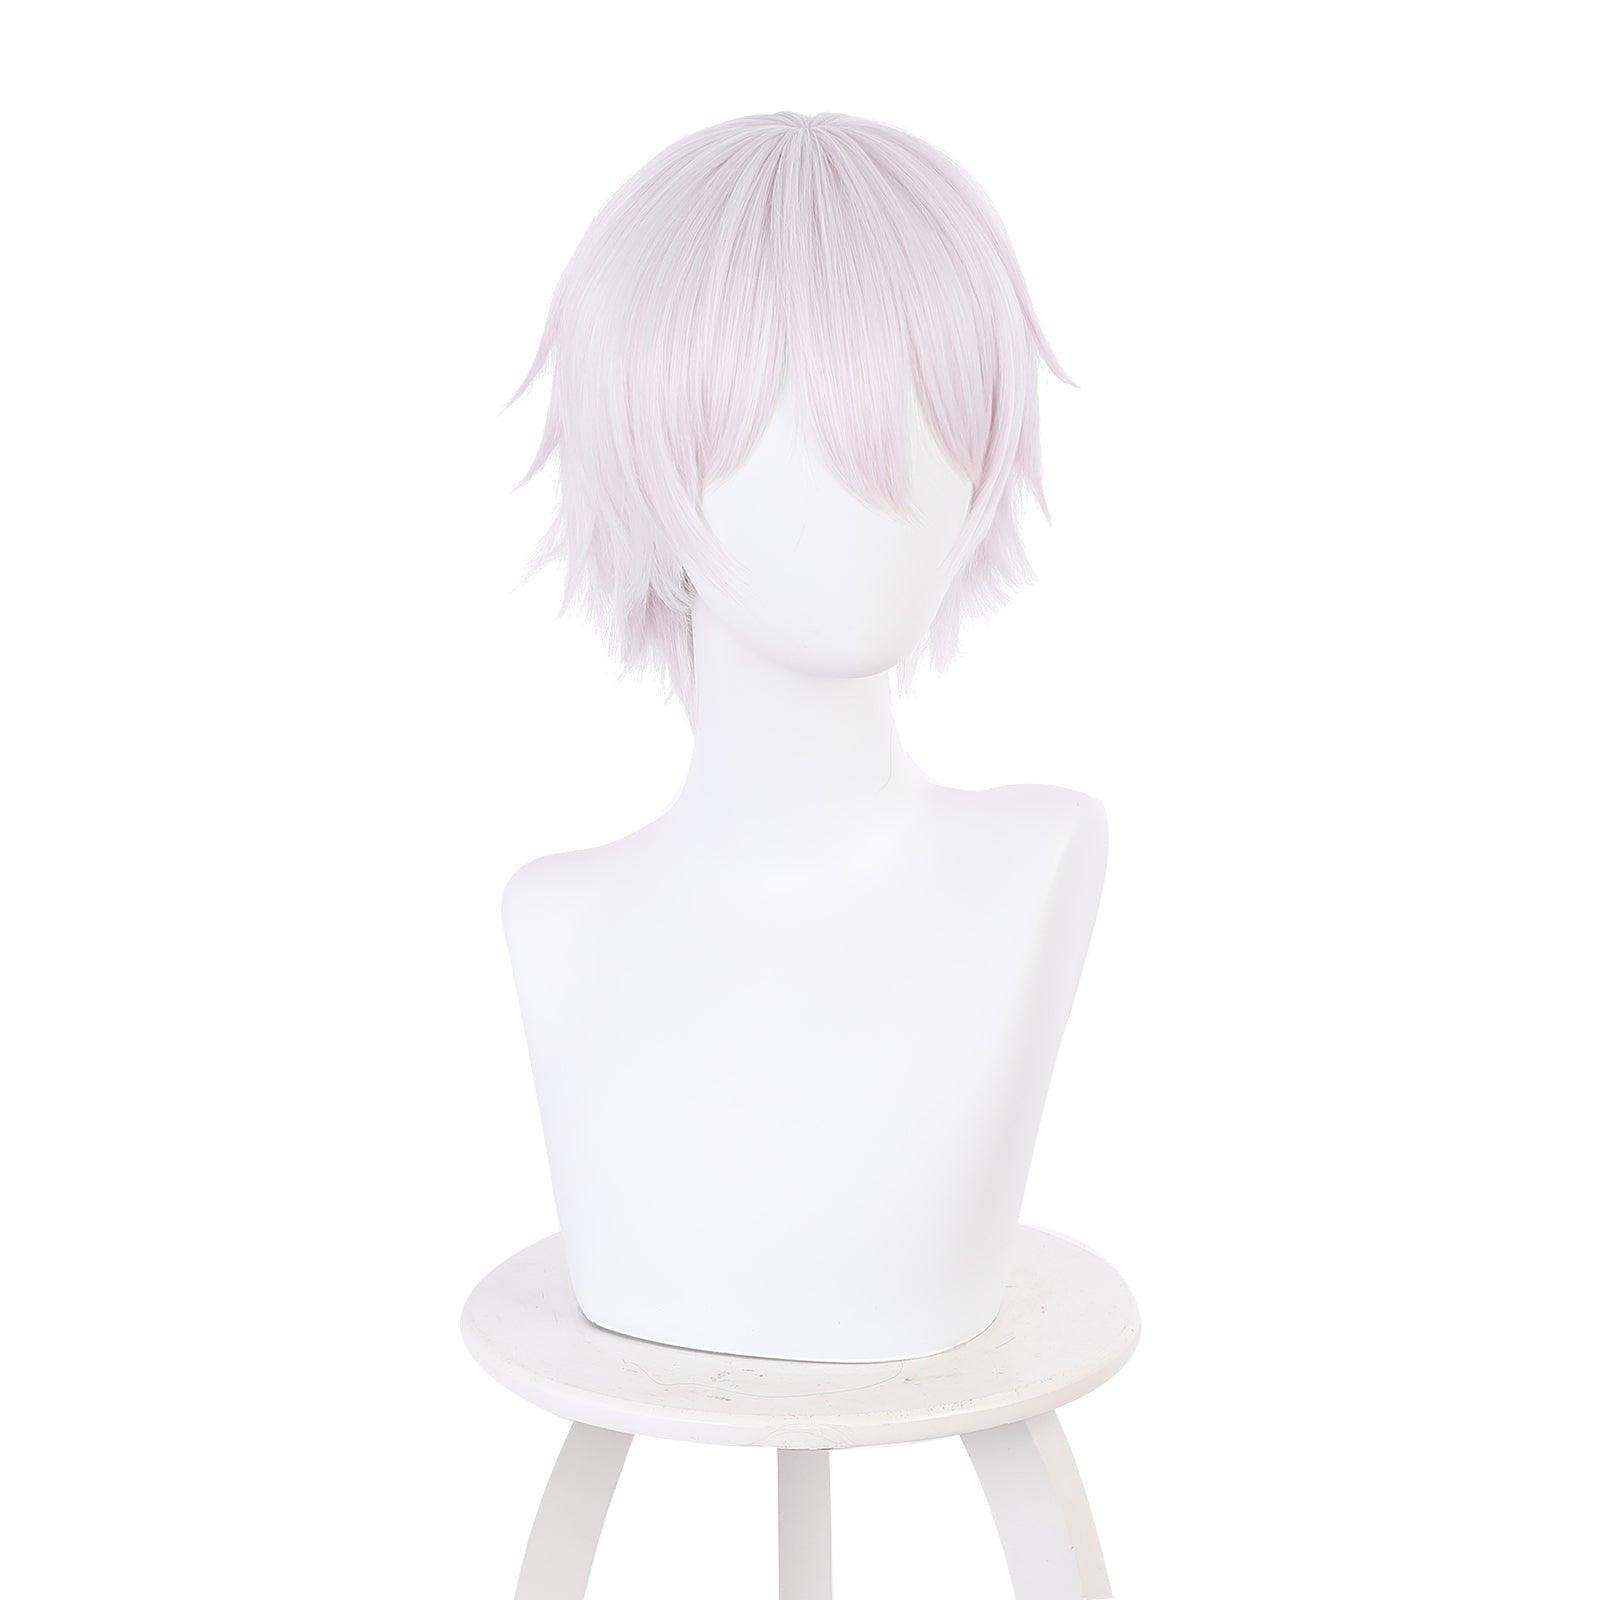 anime cosplay wigs for jeanne pink cosplay wig of the case study of vanitas 523c